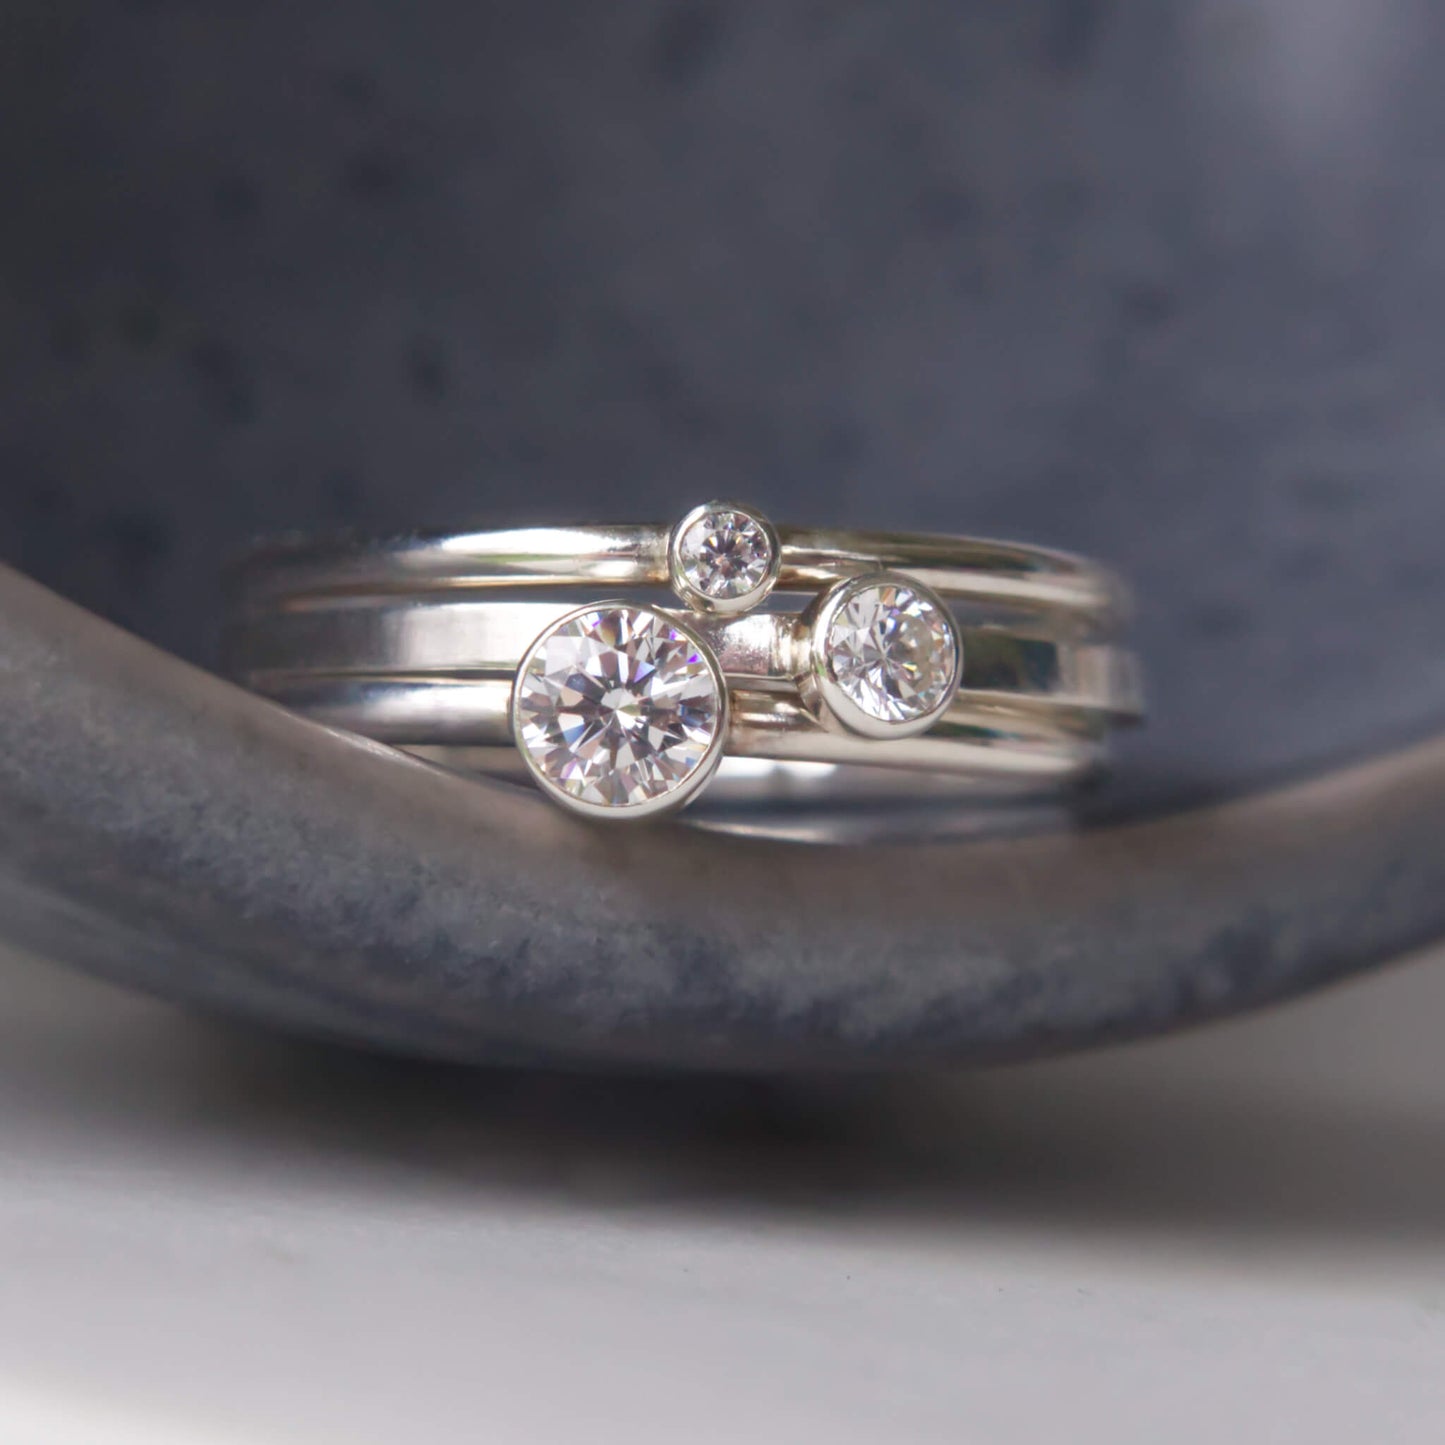 Trio of Diamond Silver Cubic Zirconia Solitaire rings with round stones. Each of the rings have a different sized gem in a 2mm, 3mm and 4mm size. Pictured on a grey ceramic background. Rings handmade by maram jewellery in Scotland UK